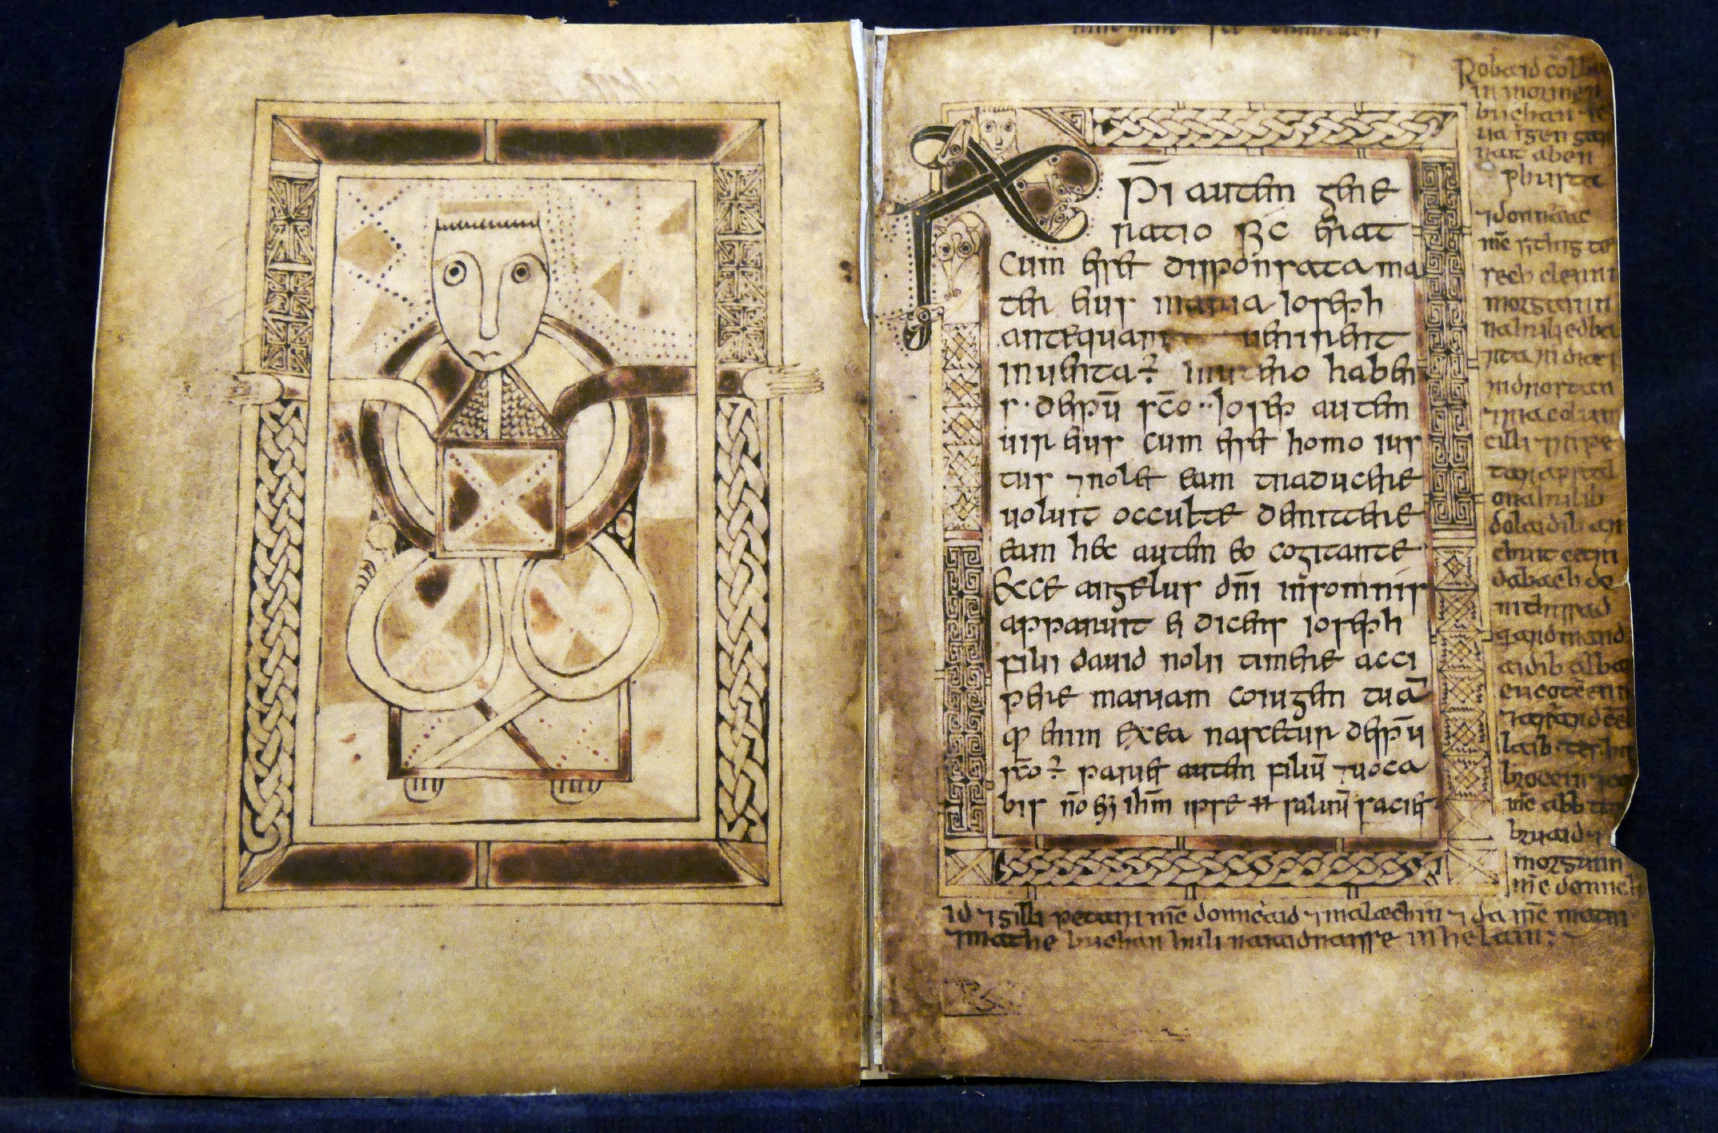 The Book of Deer - a gospel book written in Latin by the Aberdeenshire monks around the tenth century.